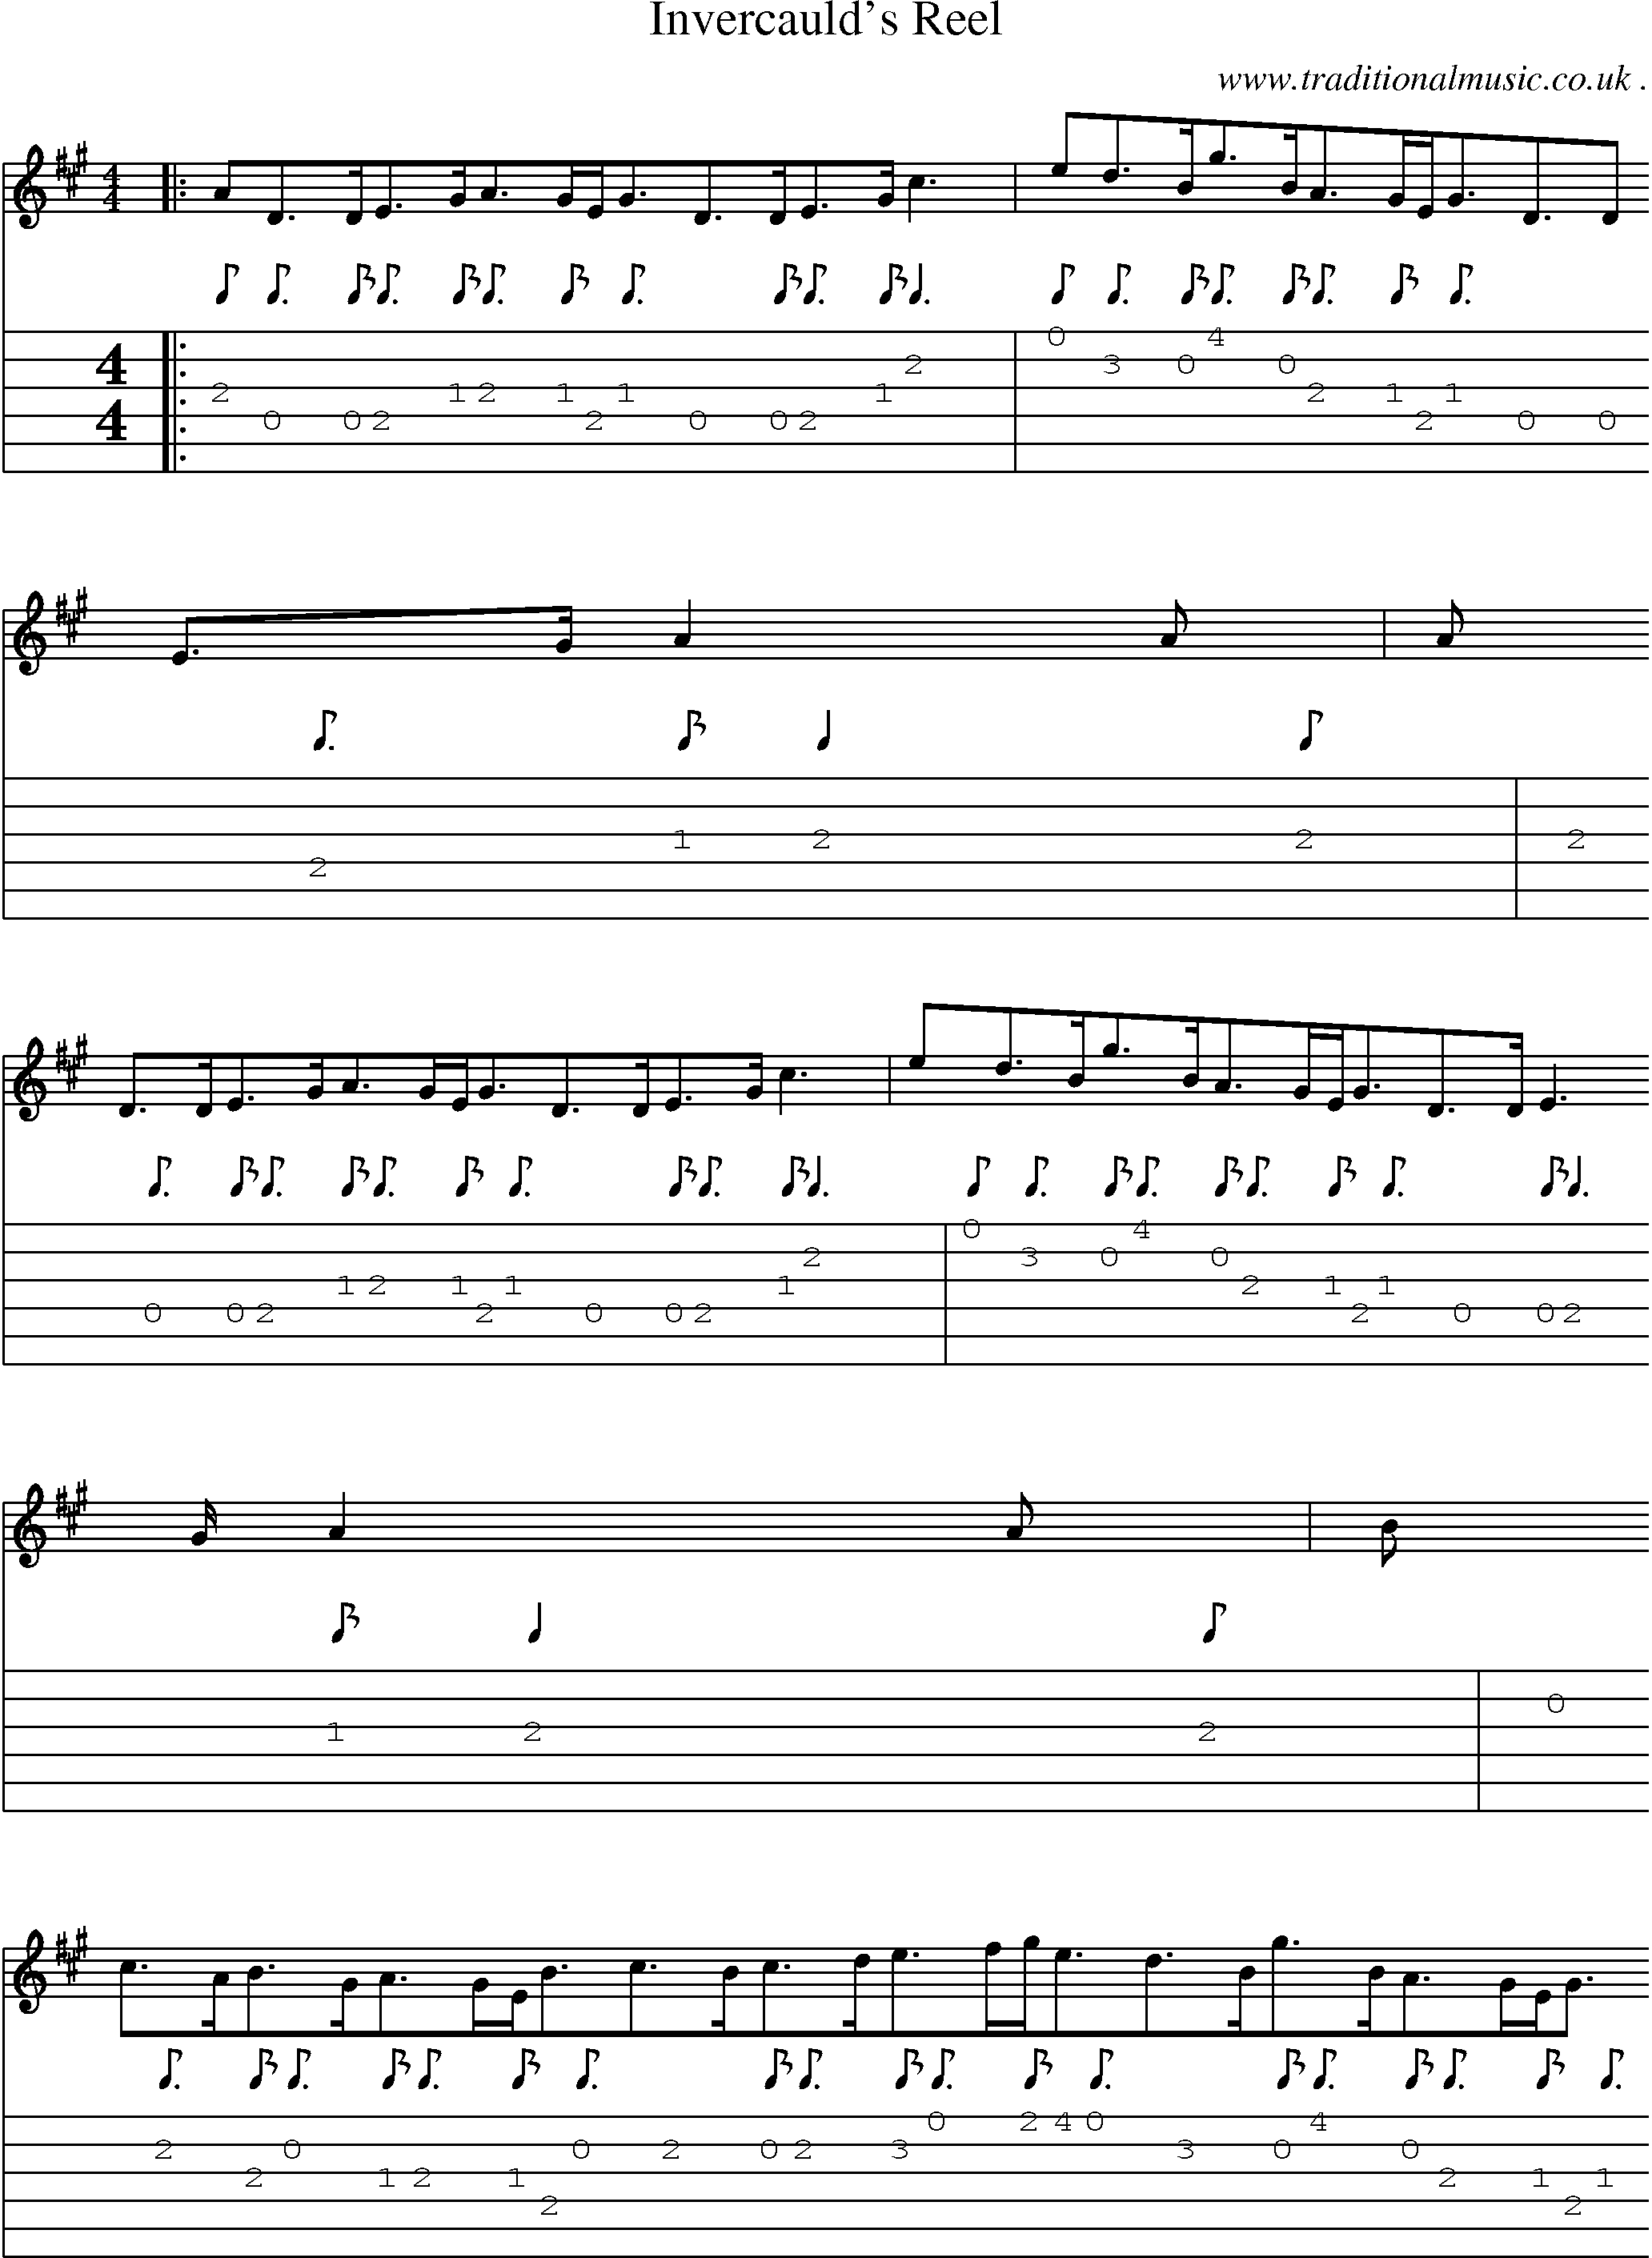 Sheet-Music and Guitar Tabs for Invercaulds Reel